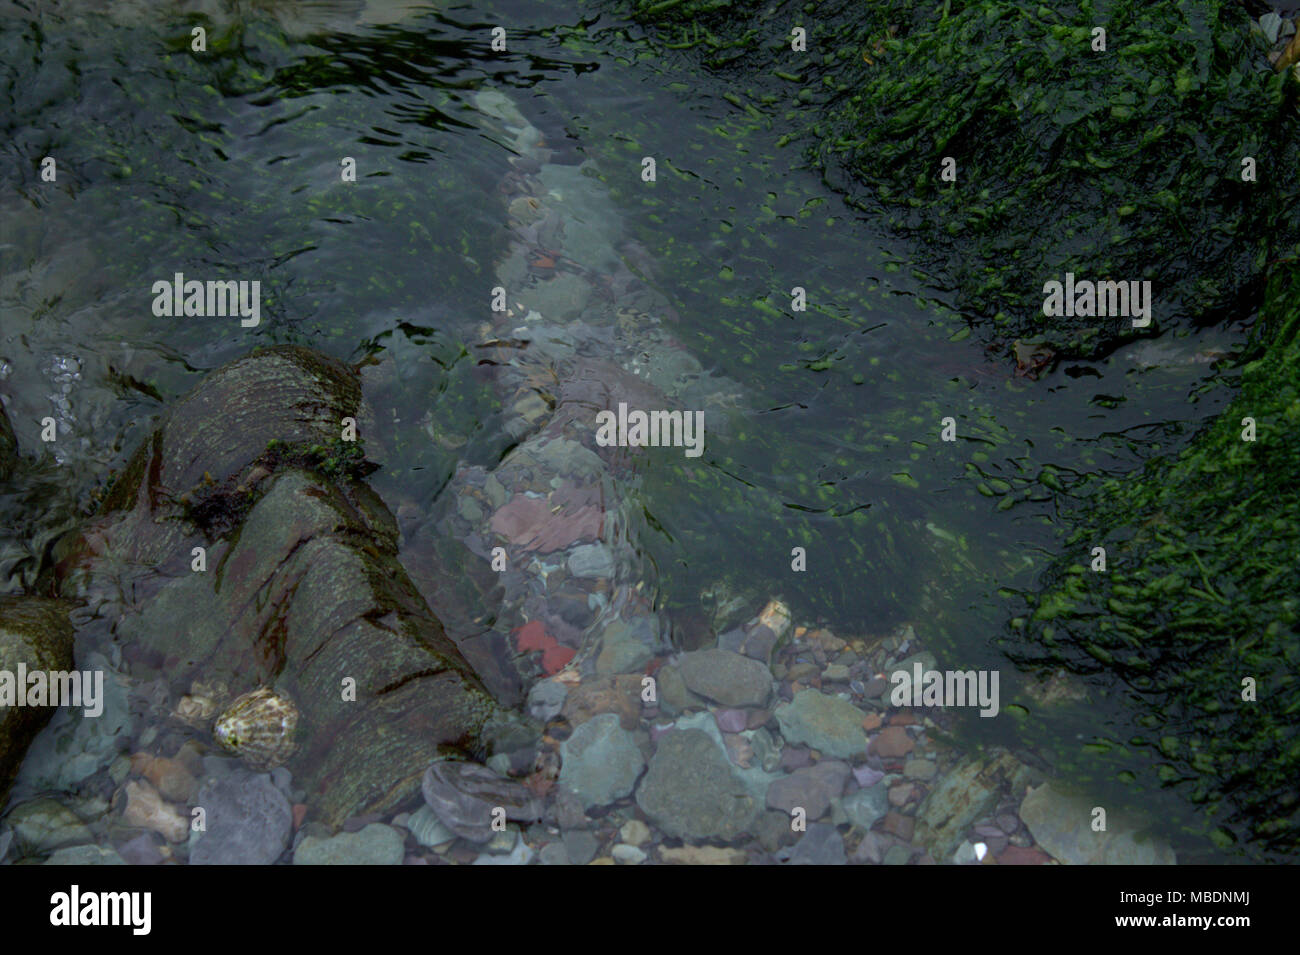 clear waters of a rock pool at low tide with seaweed and limpets on the rocks. Stock Photo